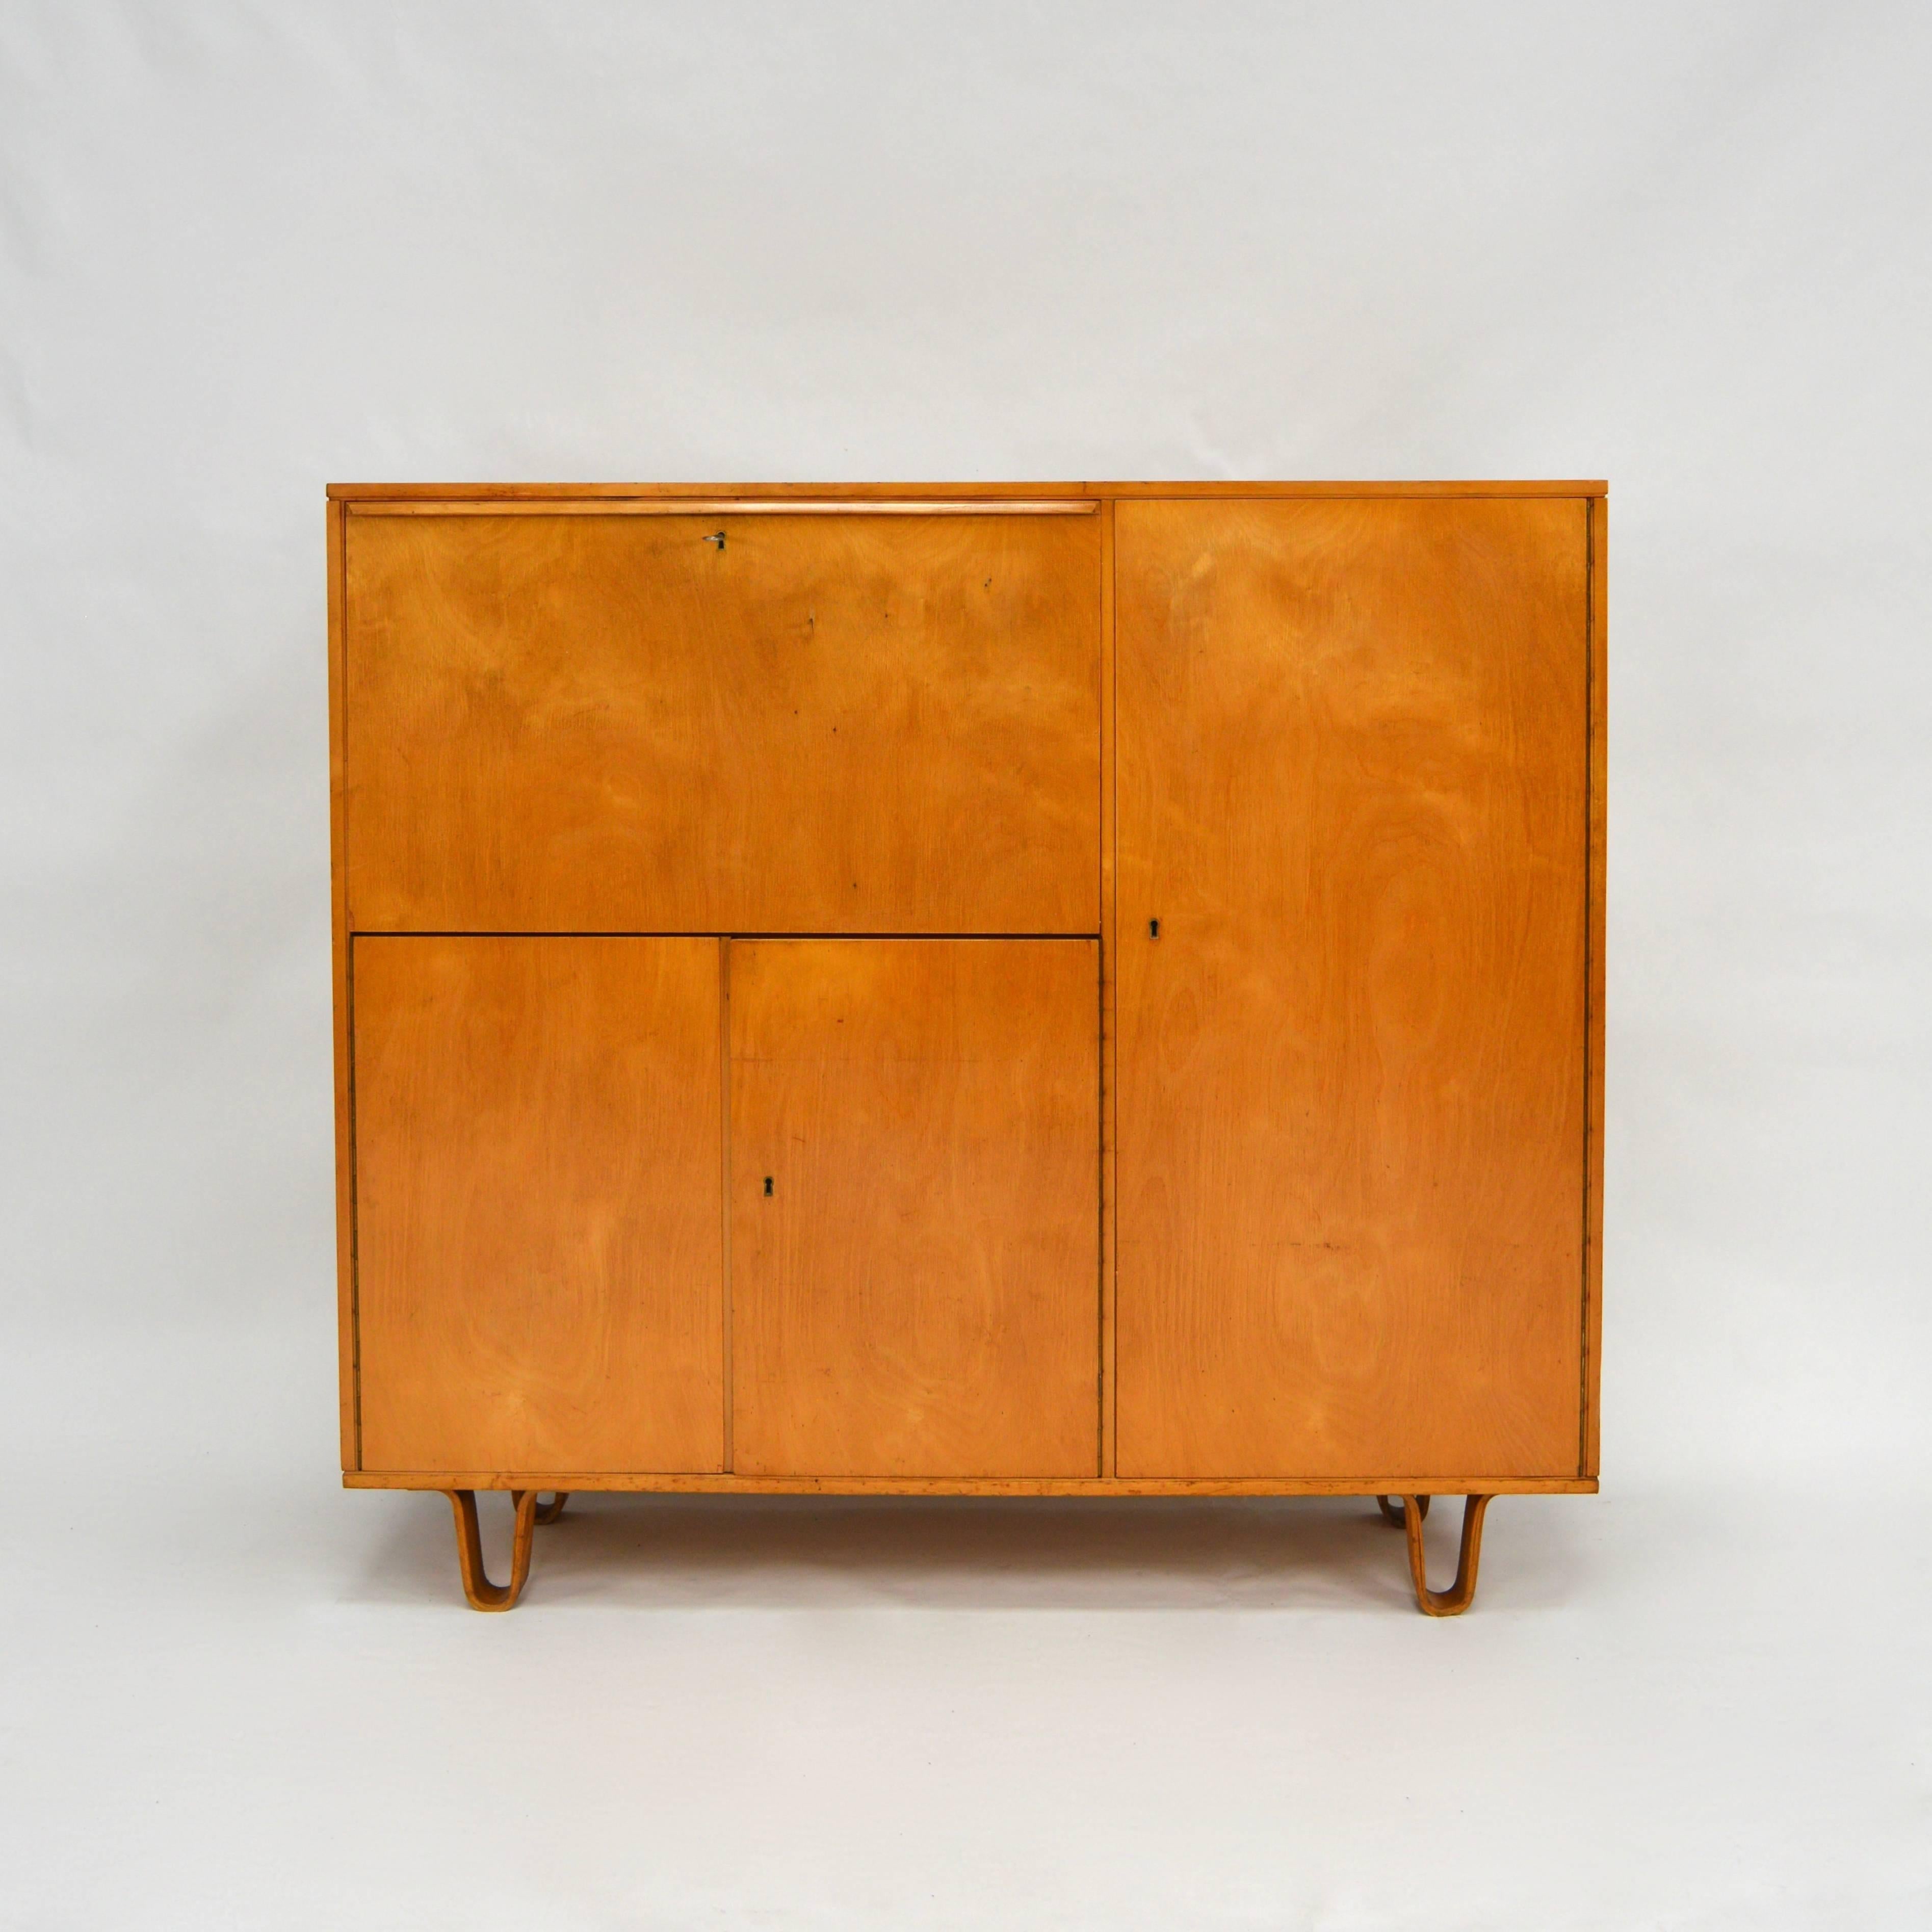 Model CB01 birch series cabinet by Cees Braakman for Pastoe. The cabinet has some age and use related wear and small damages but overall in good condition. It has a drop down door that can be used as writing desk. It also has the famous plywood